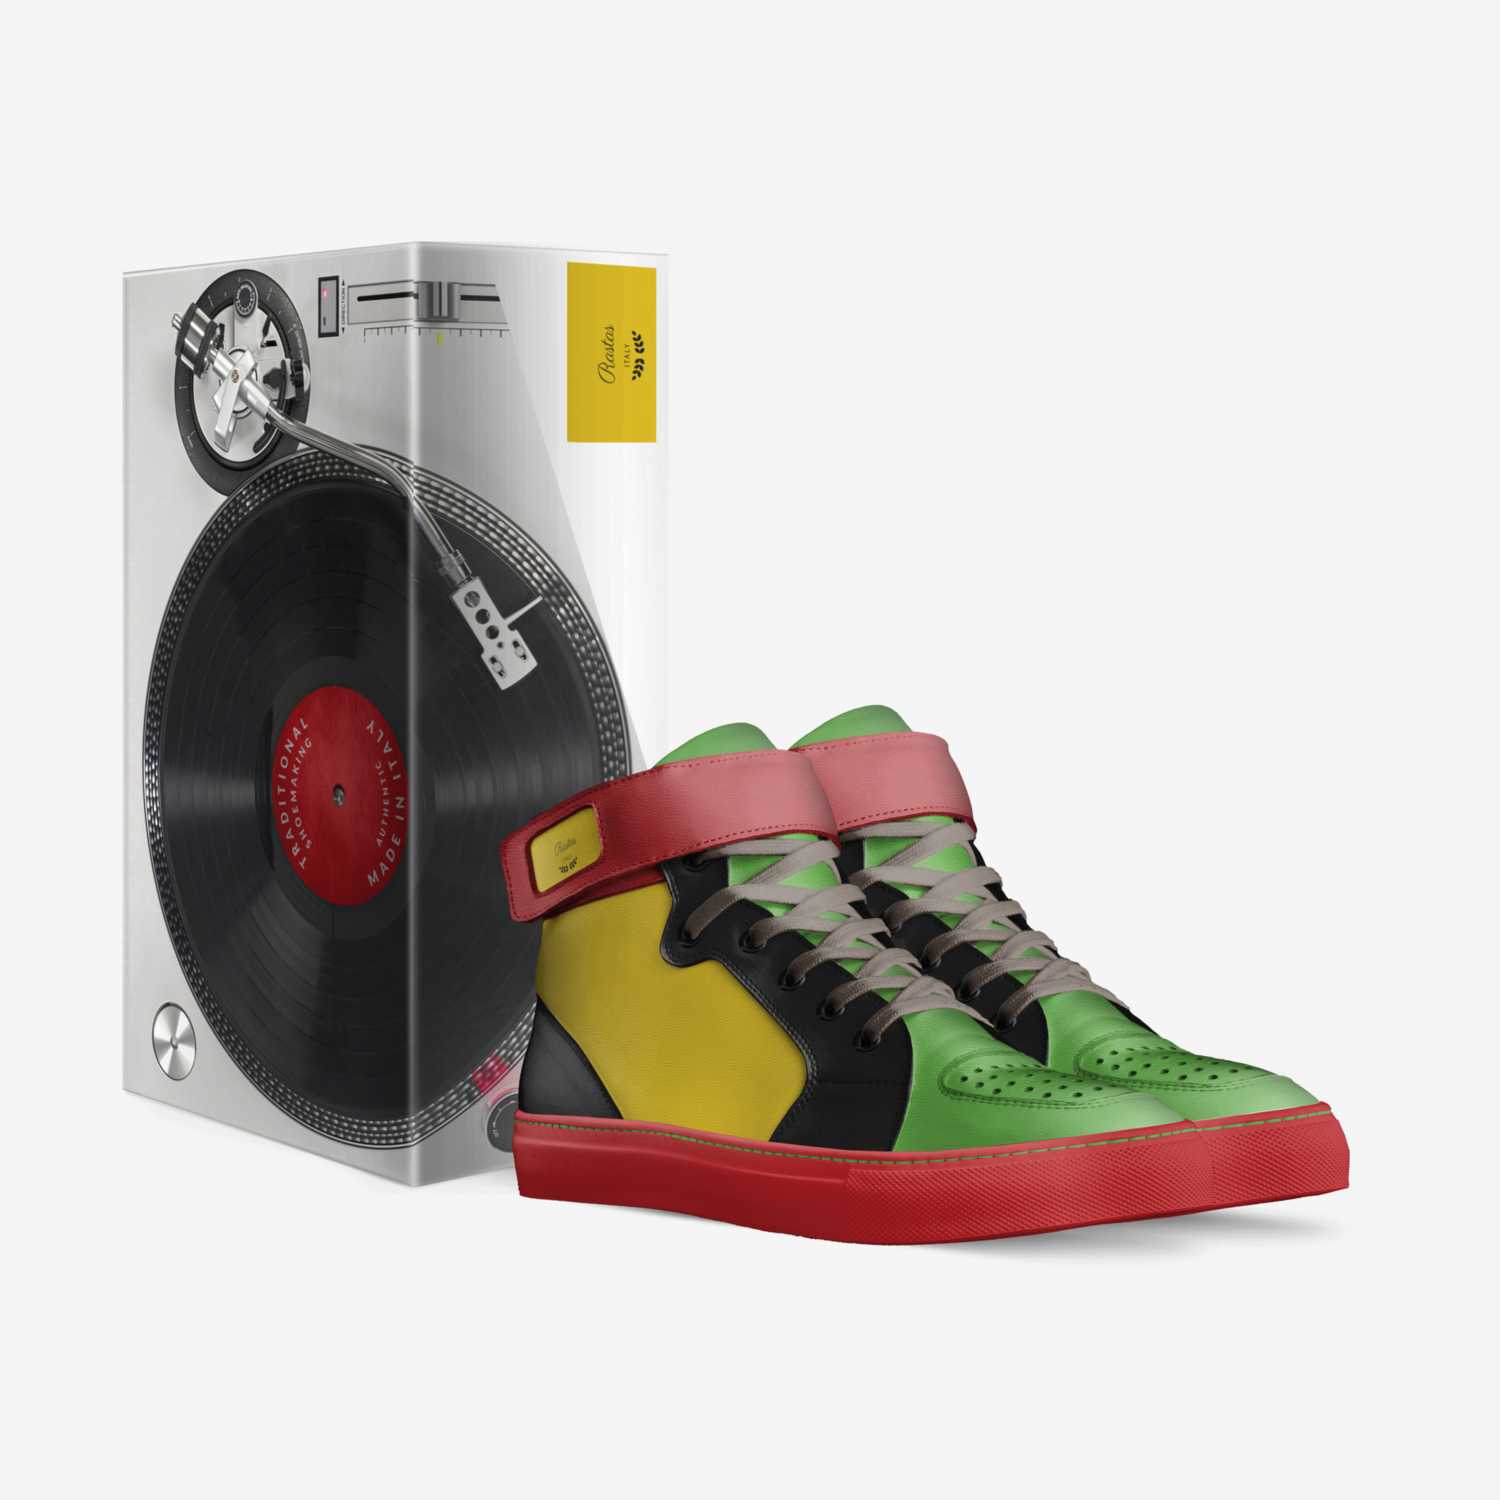 Rastas custom made in Italy shoes by Paul Goodspeed | Box view